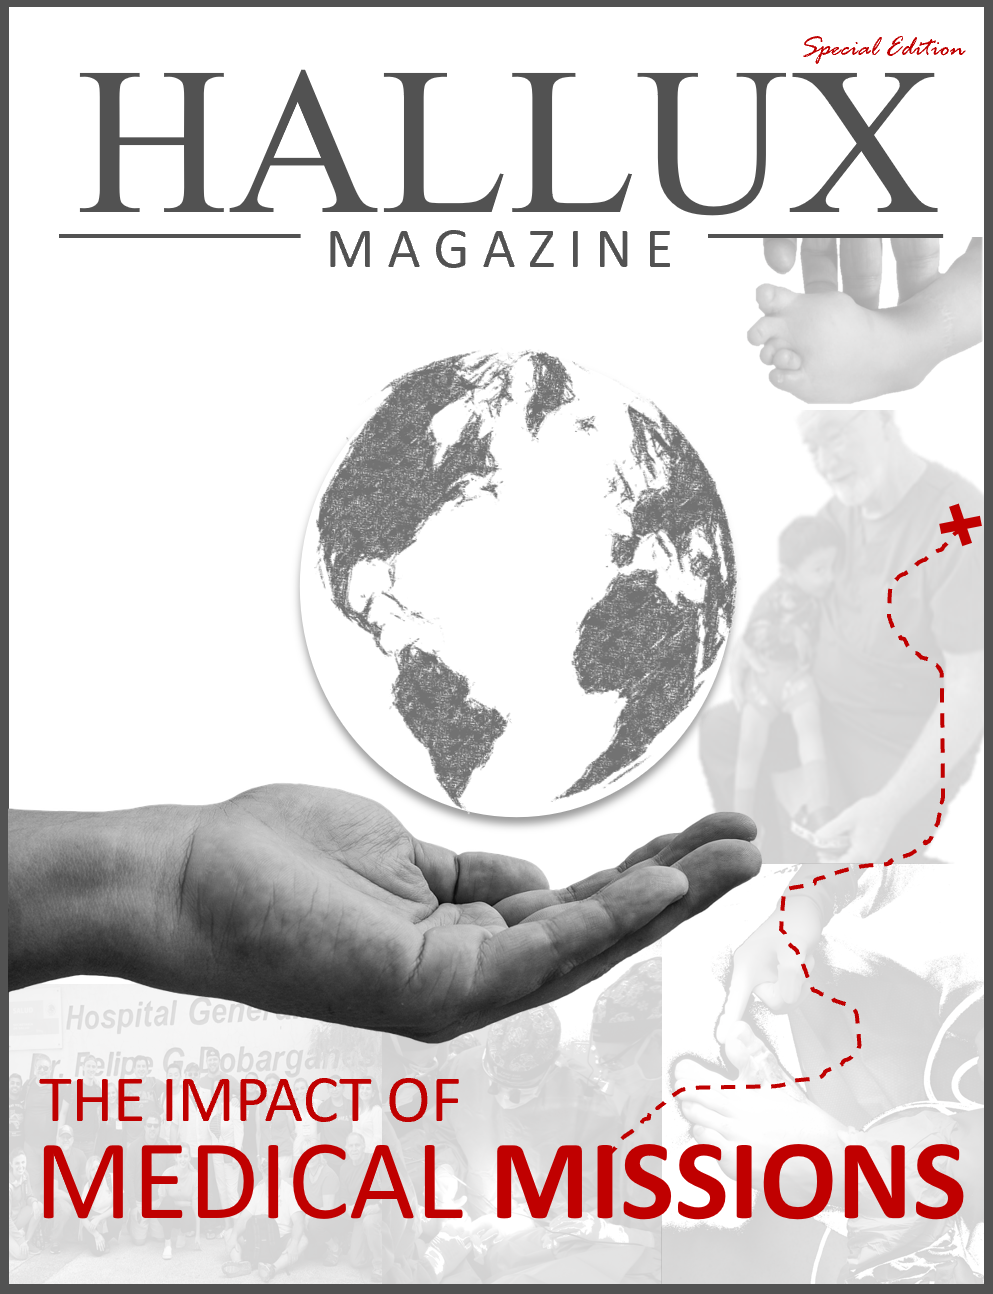 The Impact of Medical Missions: Special Edition